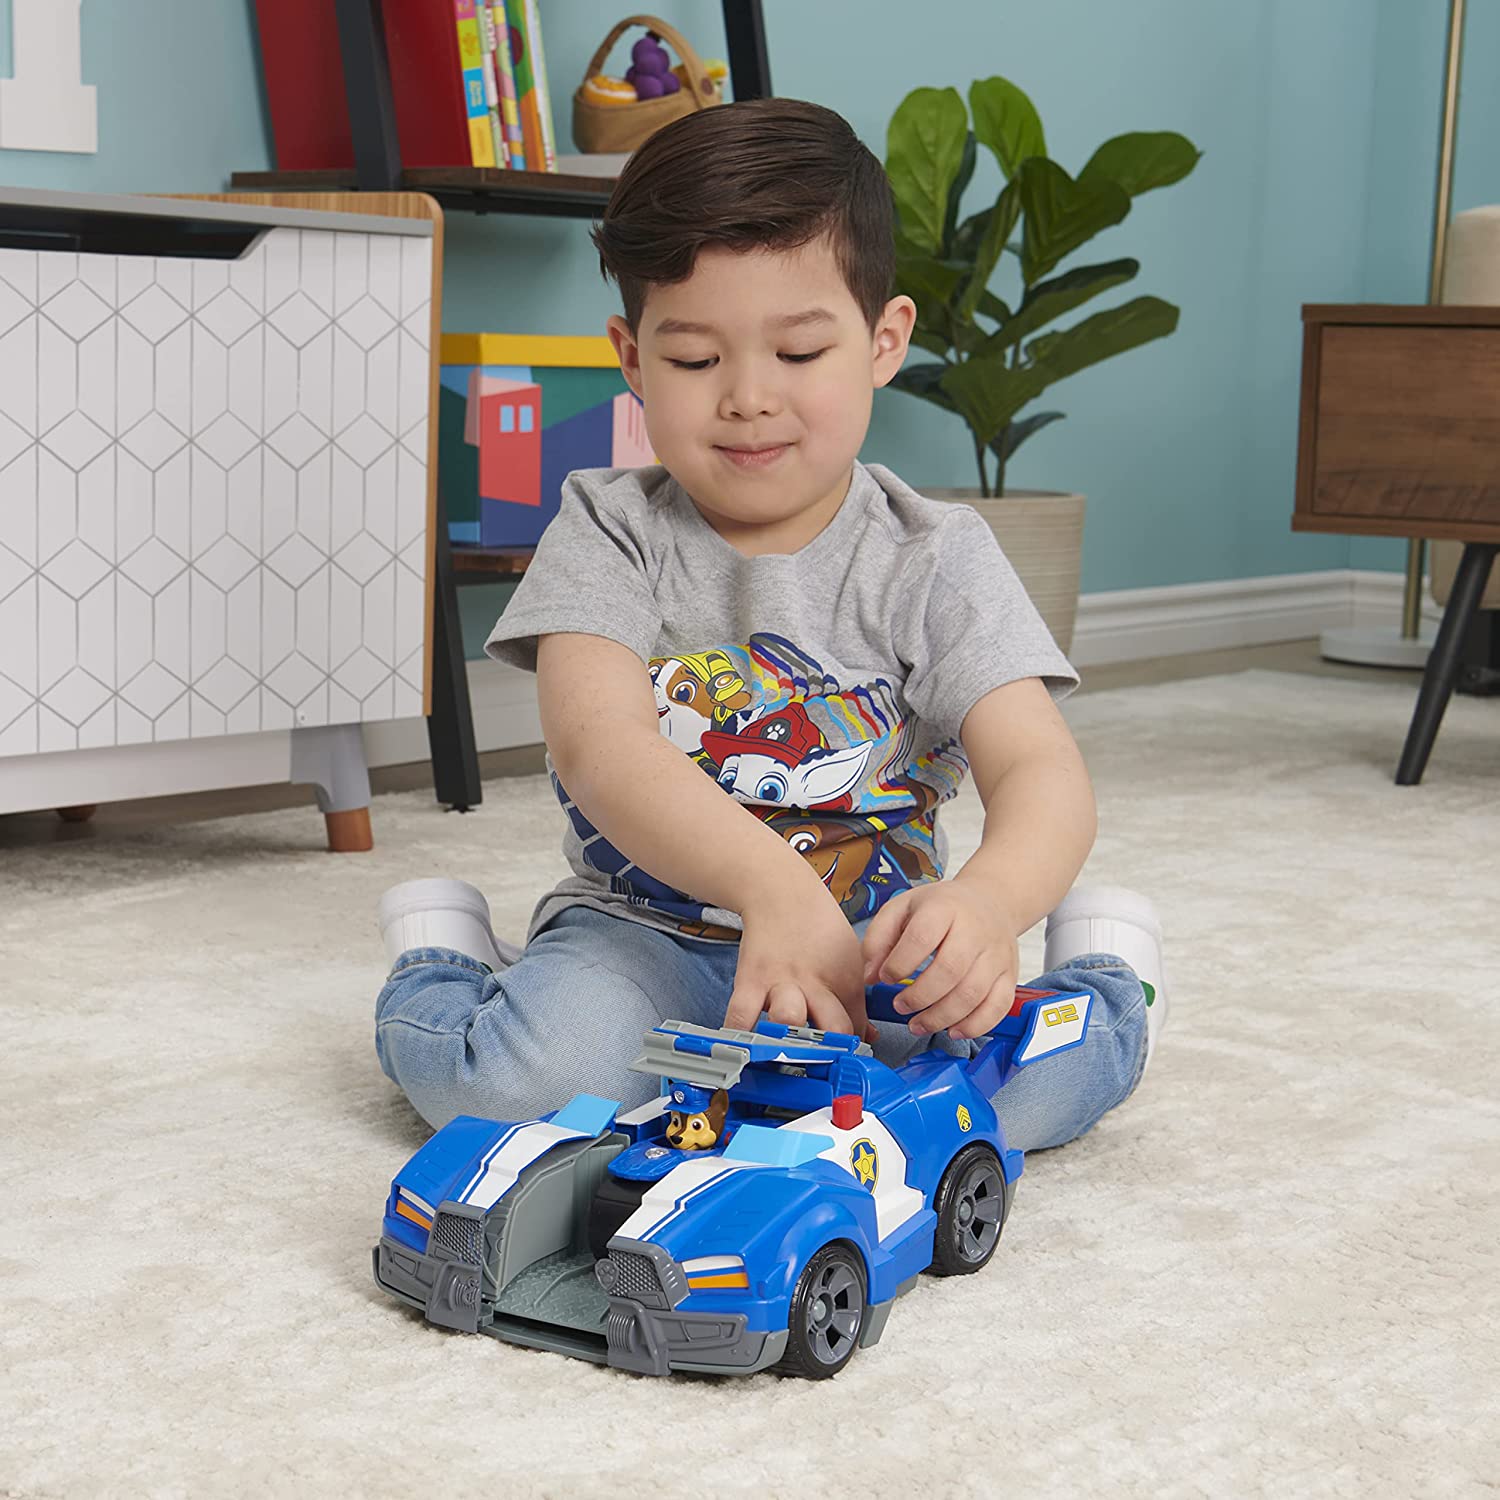 Paw Patrol - Chases Deluxe Transforming Vehicle